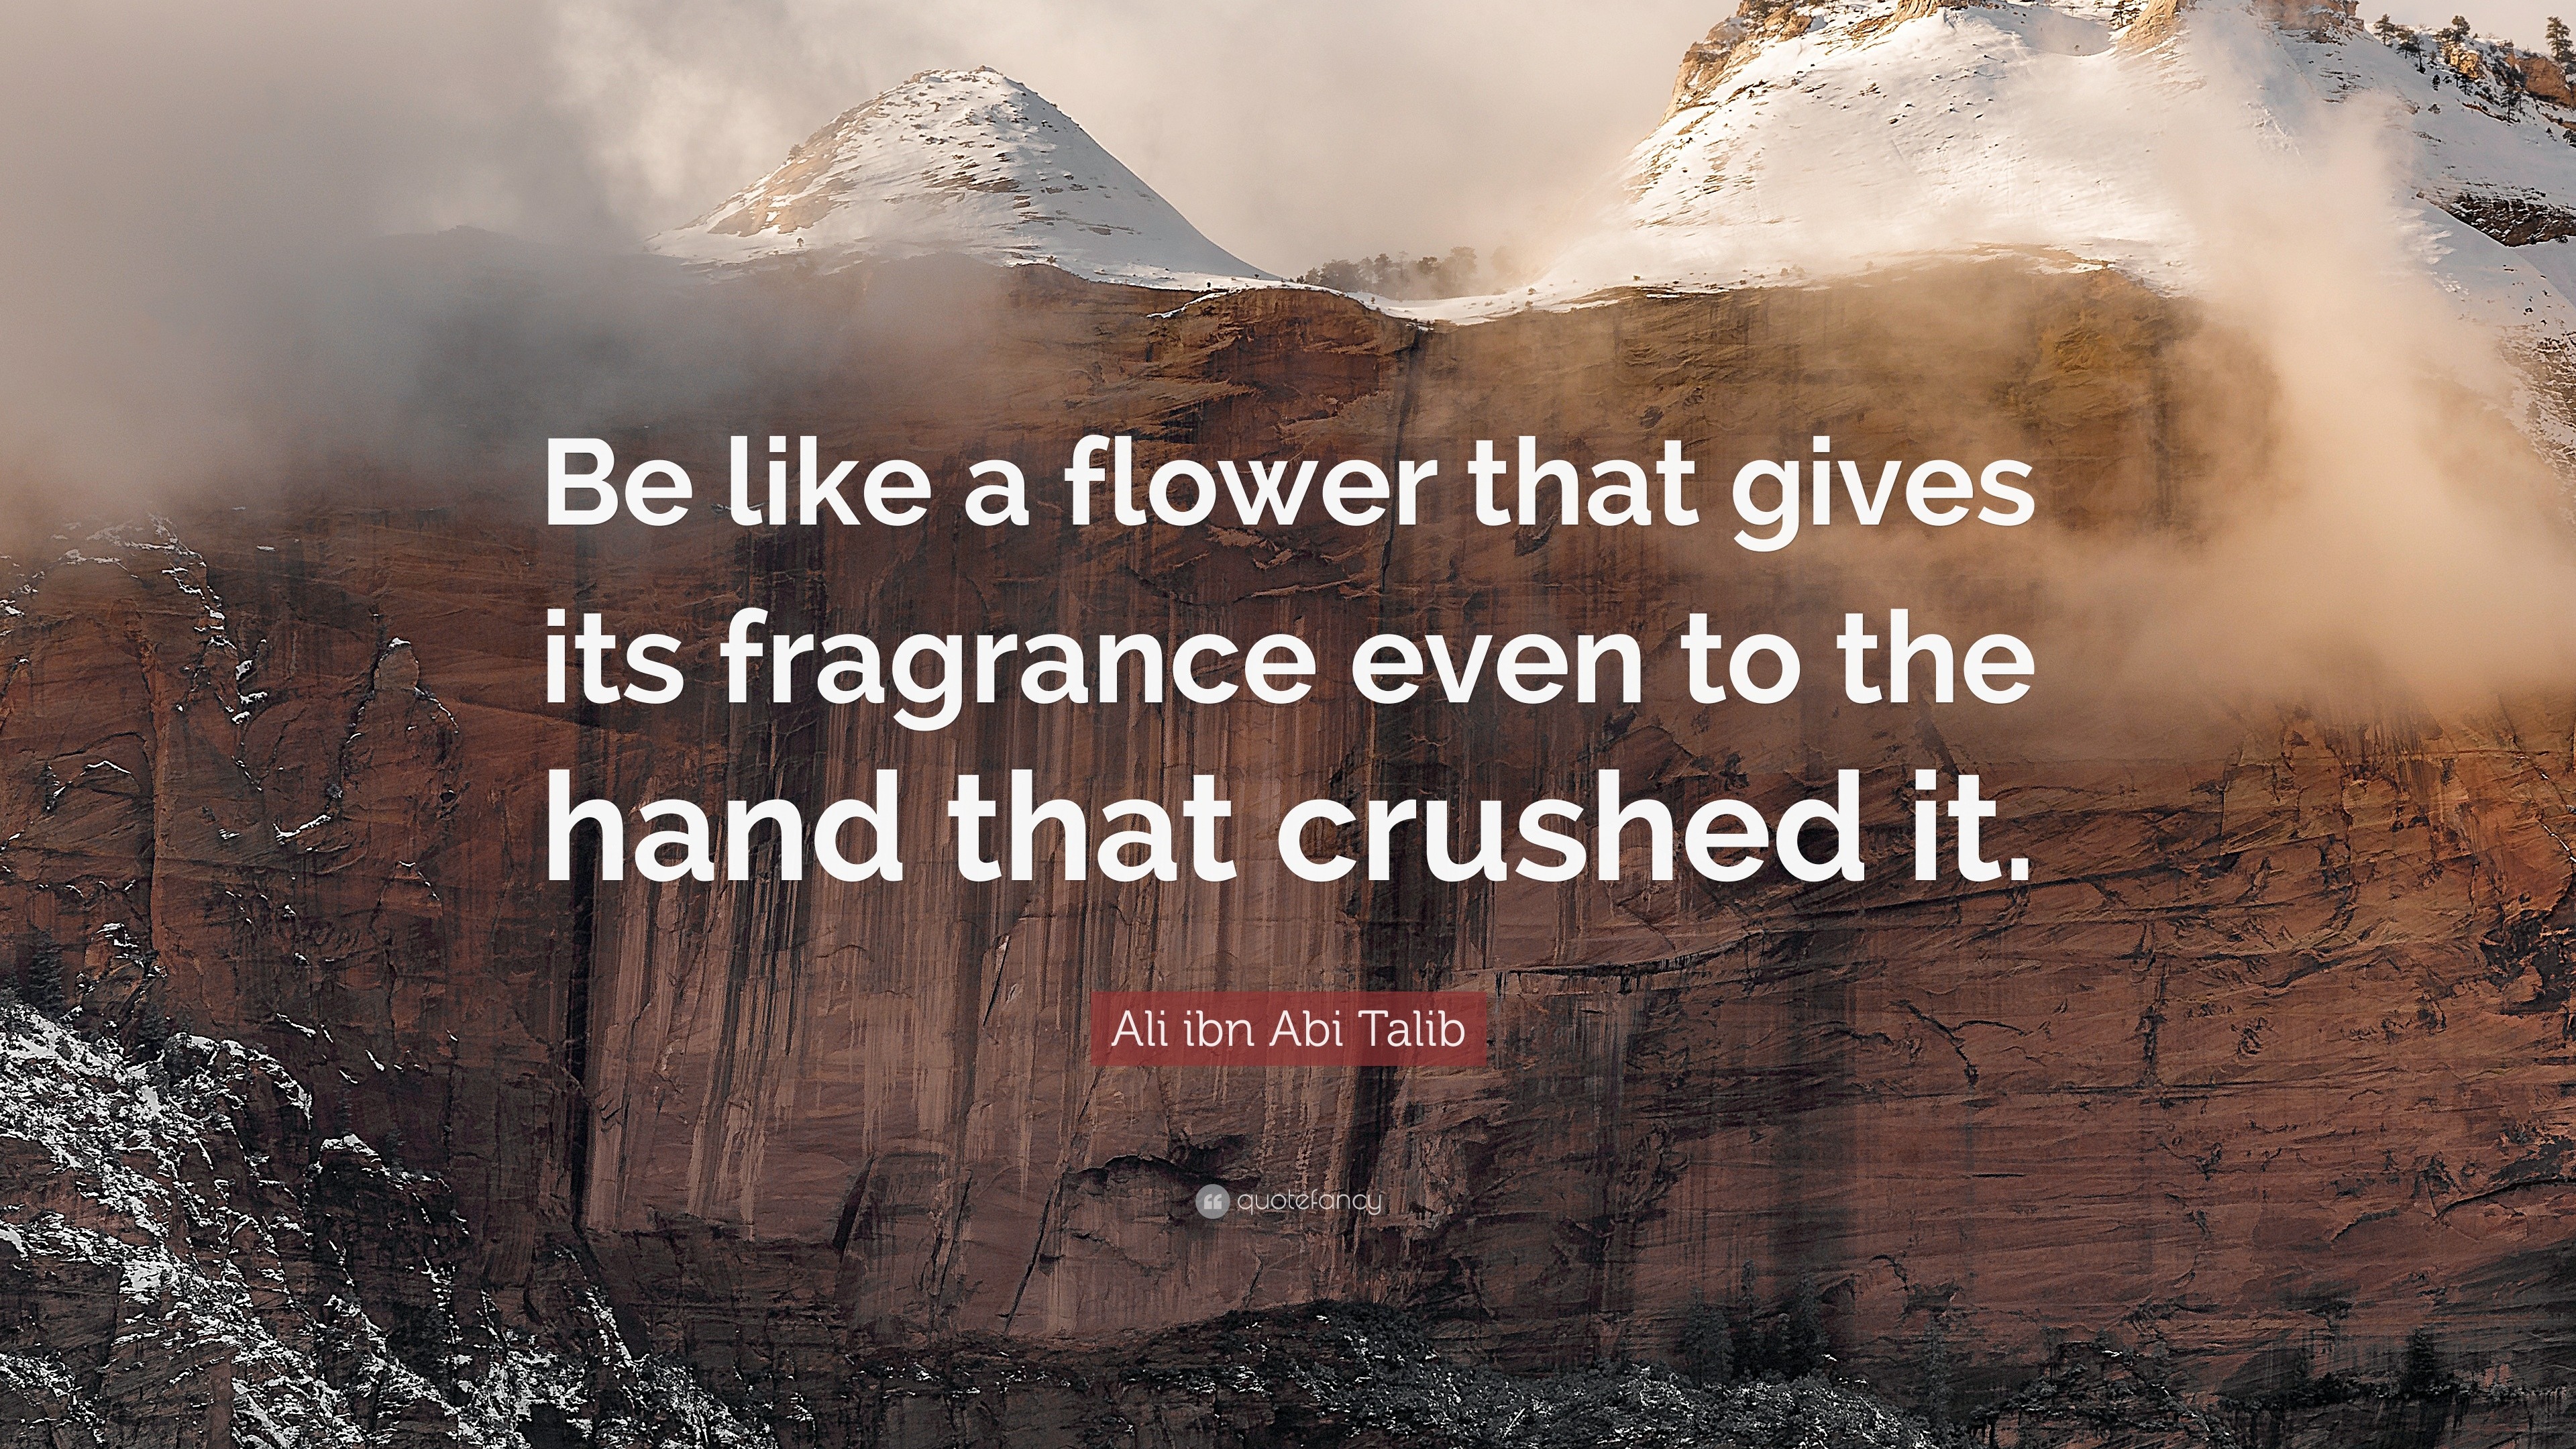 Ali Ibn Abi Talib Quote “be Like A Flower That Gives Its Fragrance